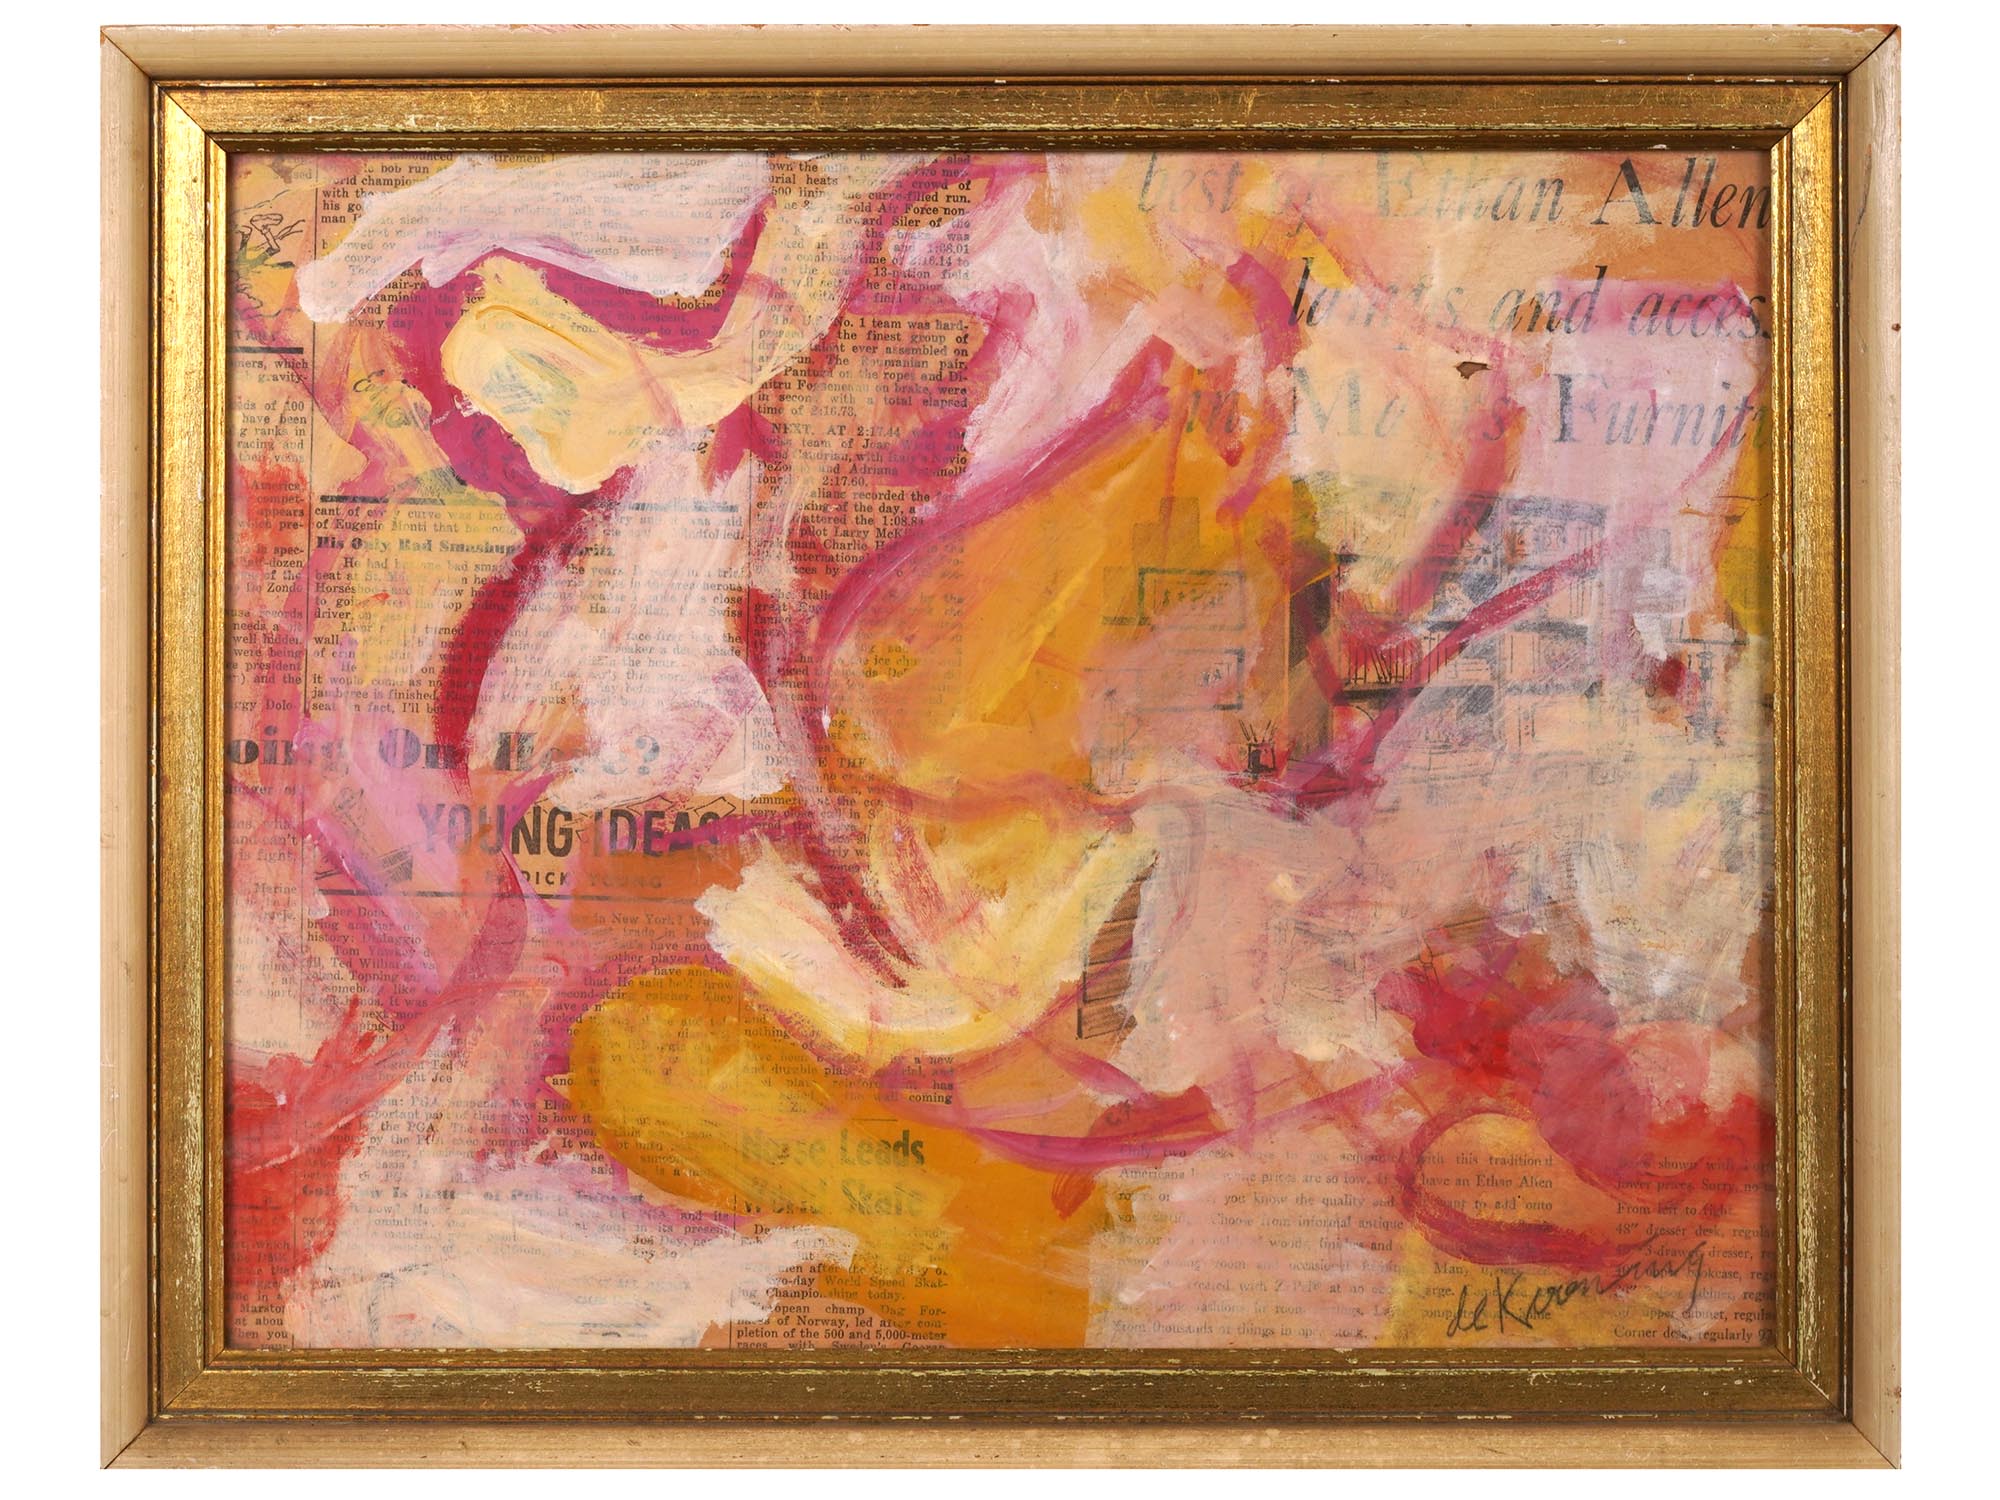 ATTRIBUTED TO WILLEM DE KOONING MIXED MEDIA PAINTING PIC-0